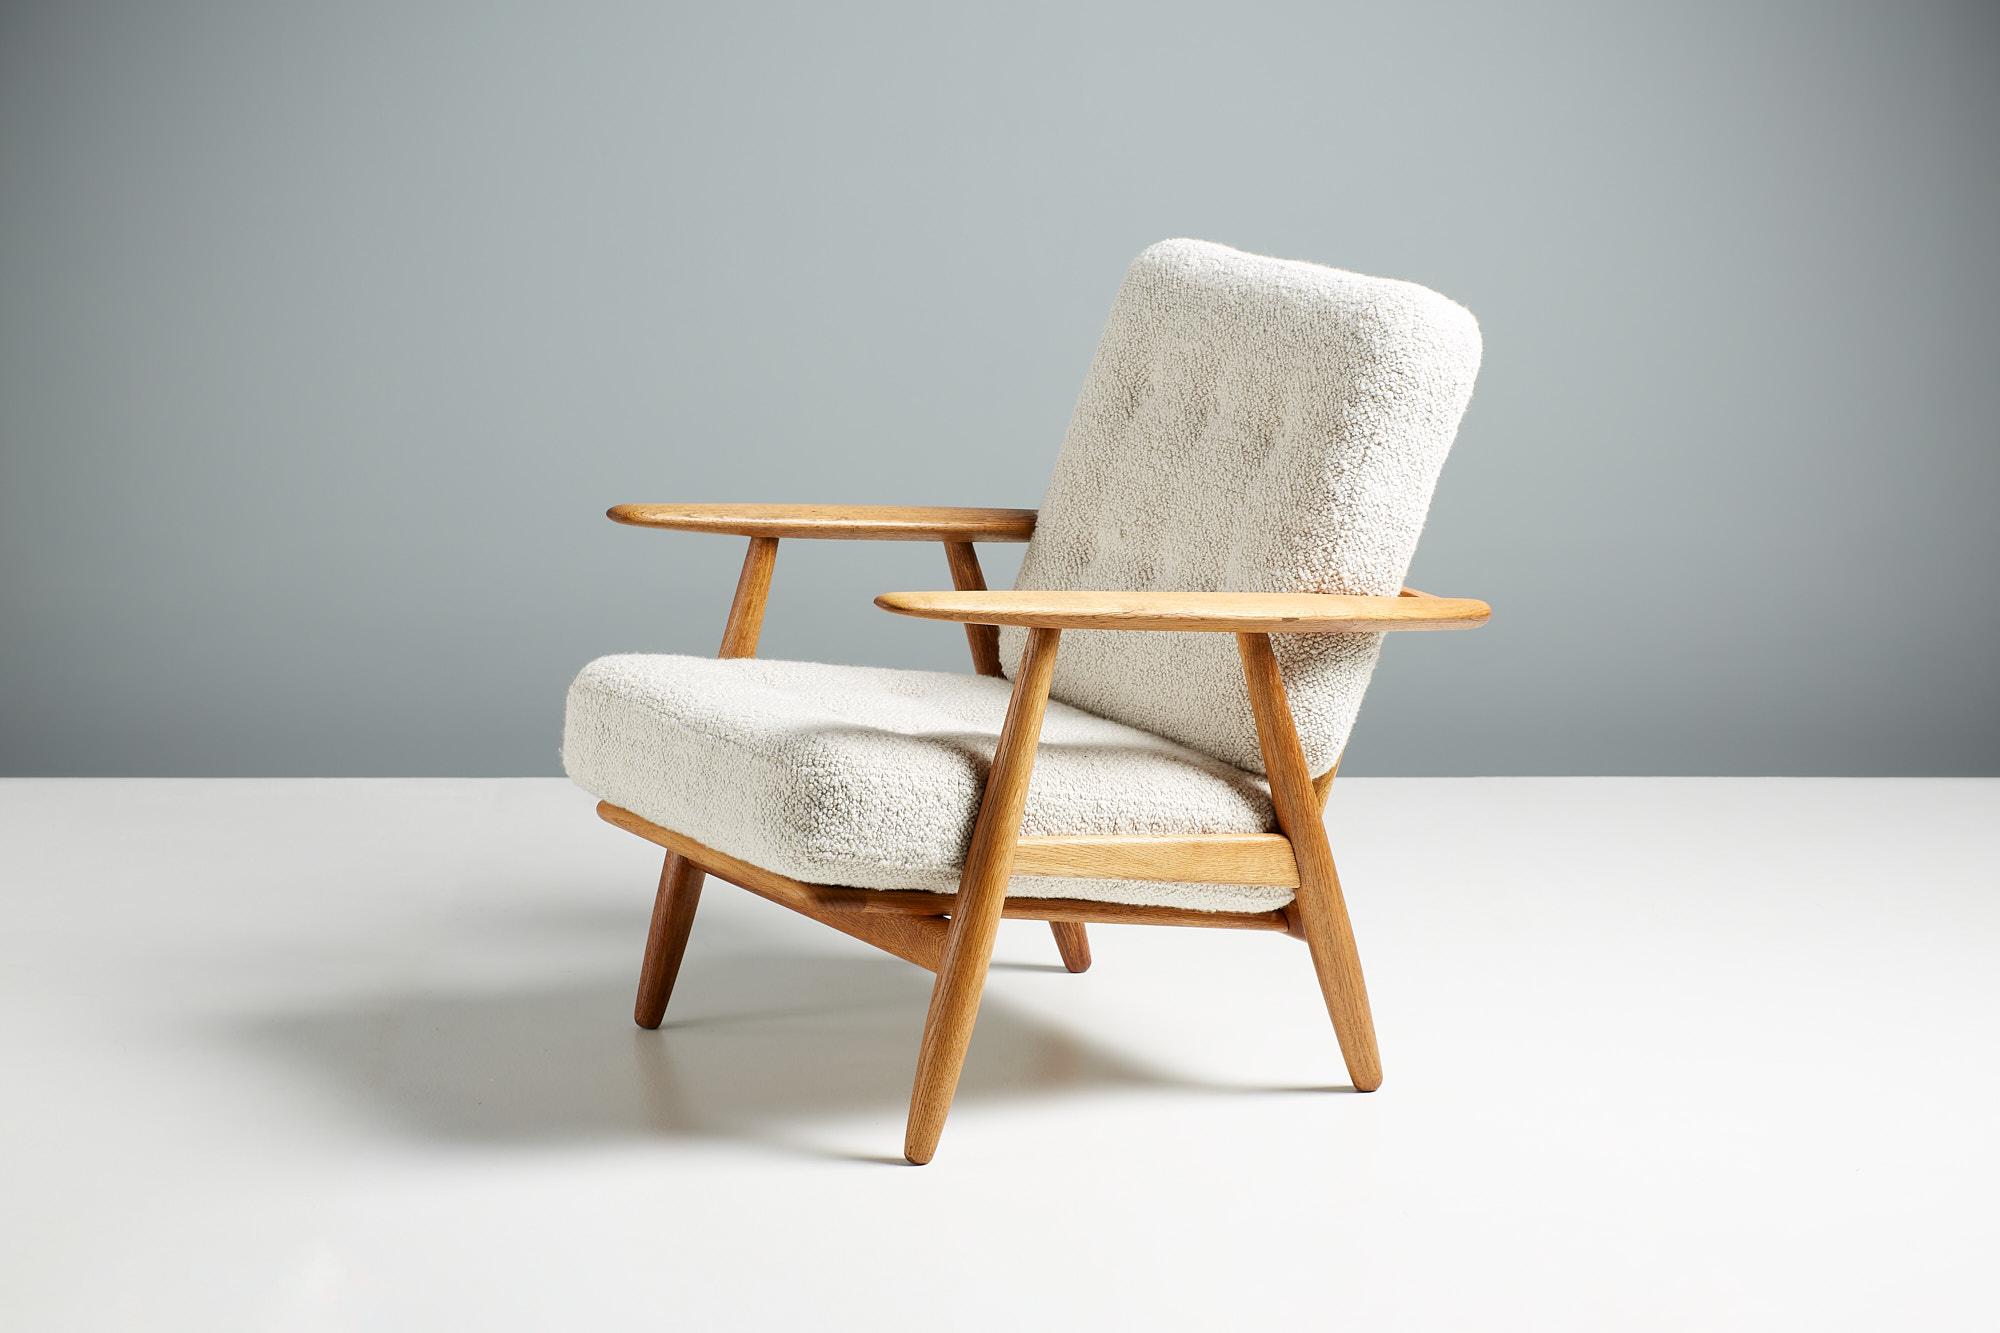 Hans Wegner Cigar Chair Model GE-240

Produced by Getama in Denmark, c1950s. The Cigar chair remains one of Wegner's most effective, contemporary and popular designs. 

This example has a carefully refinished oak frame with sprung cushions